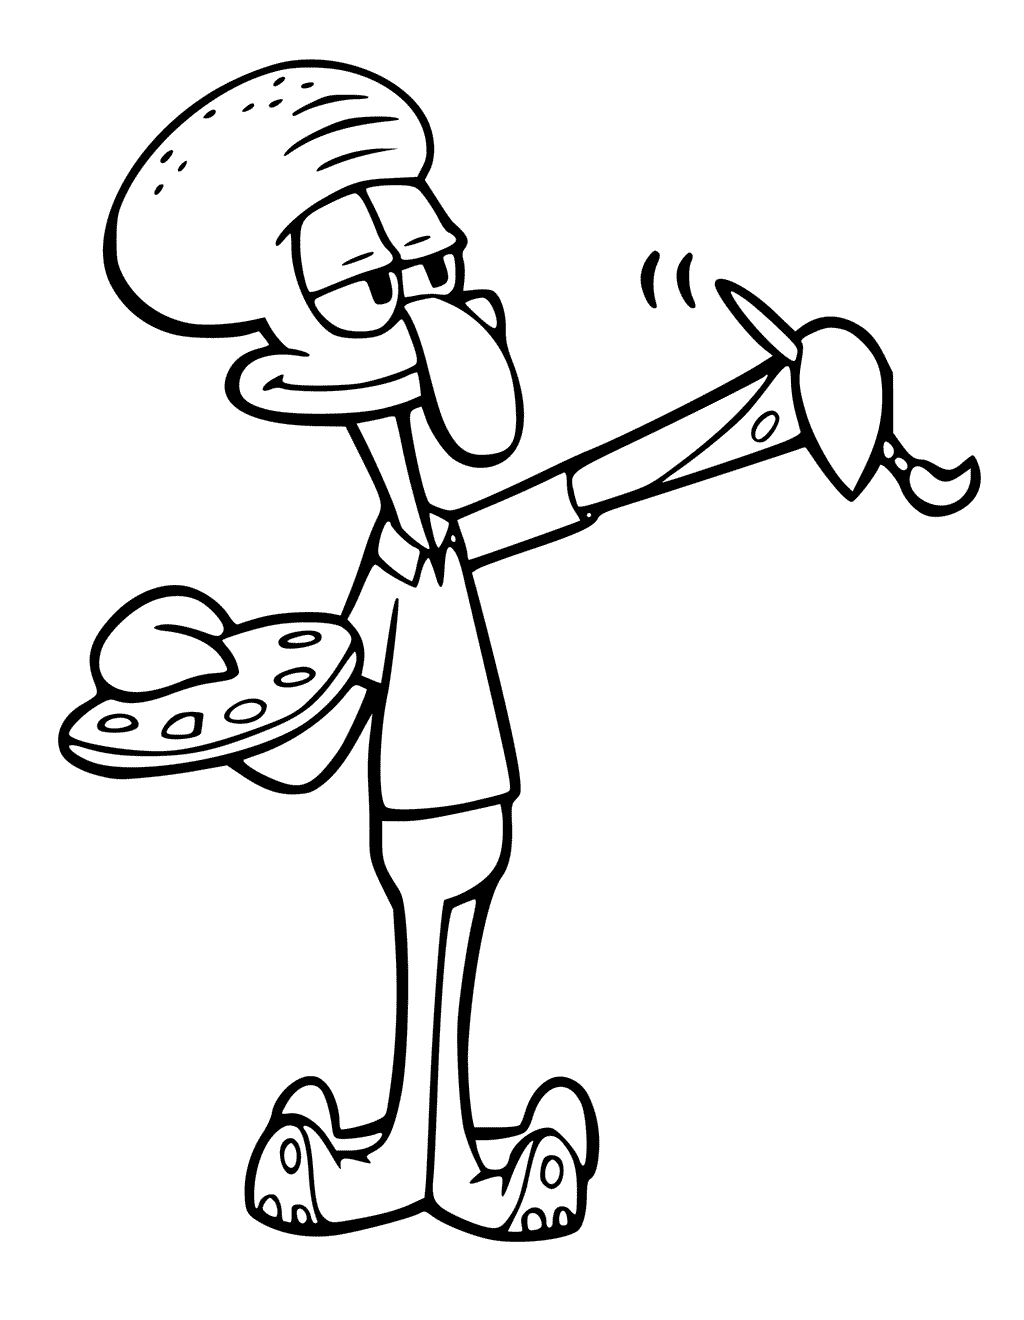 Squidward Painting Coloring Pages